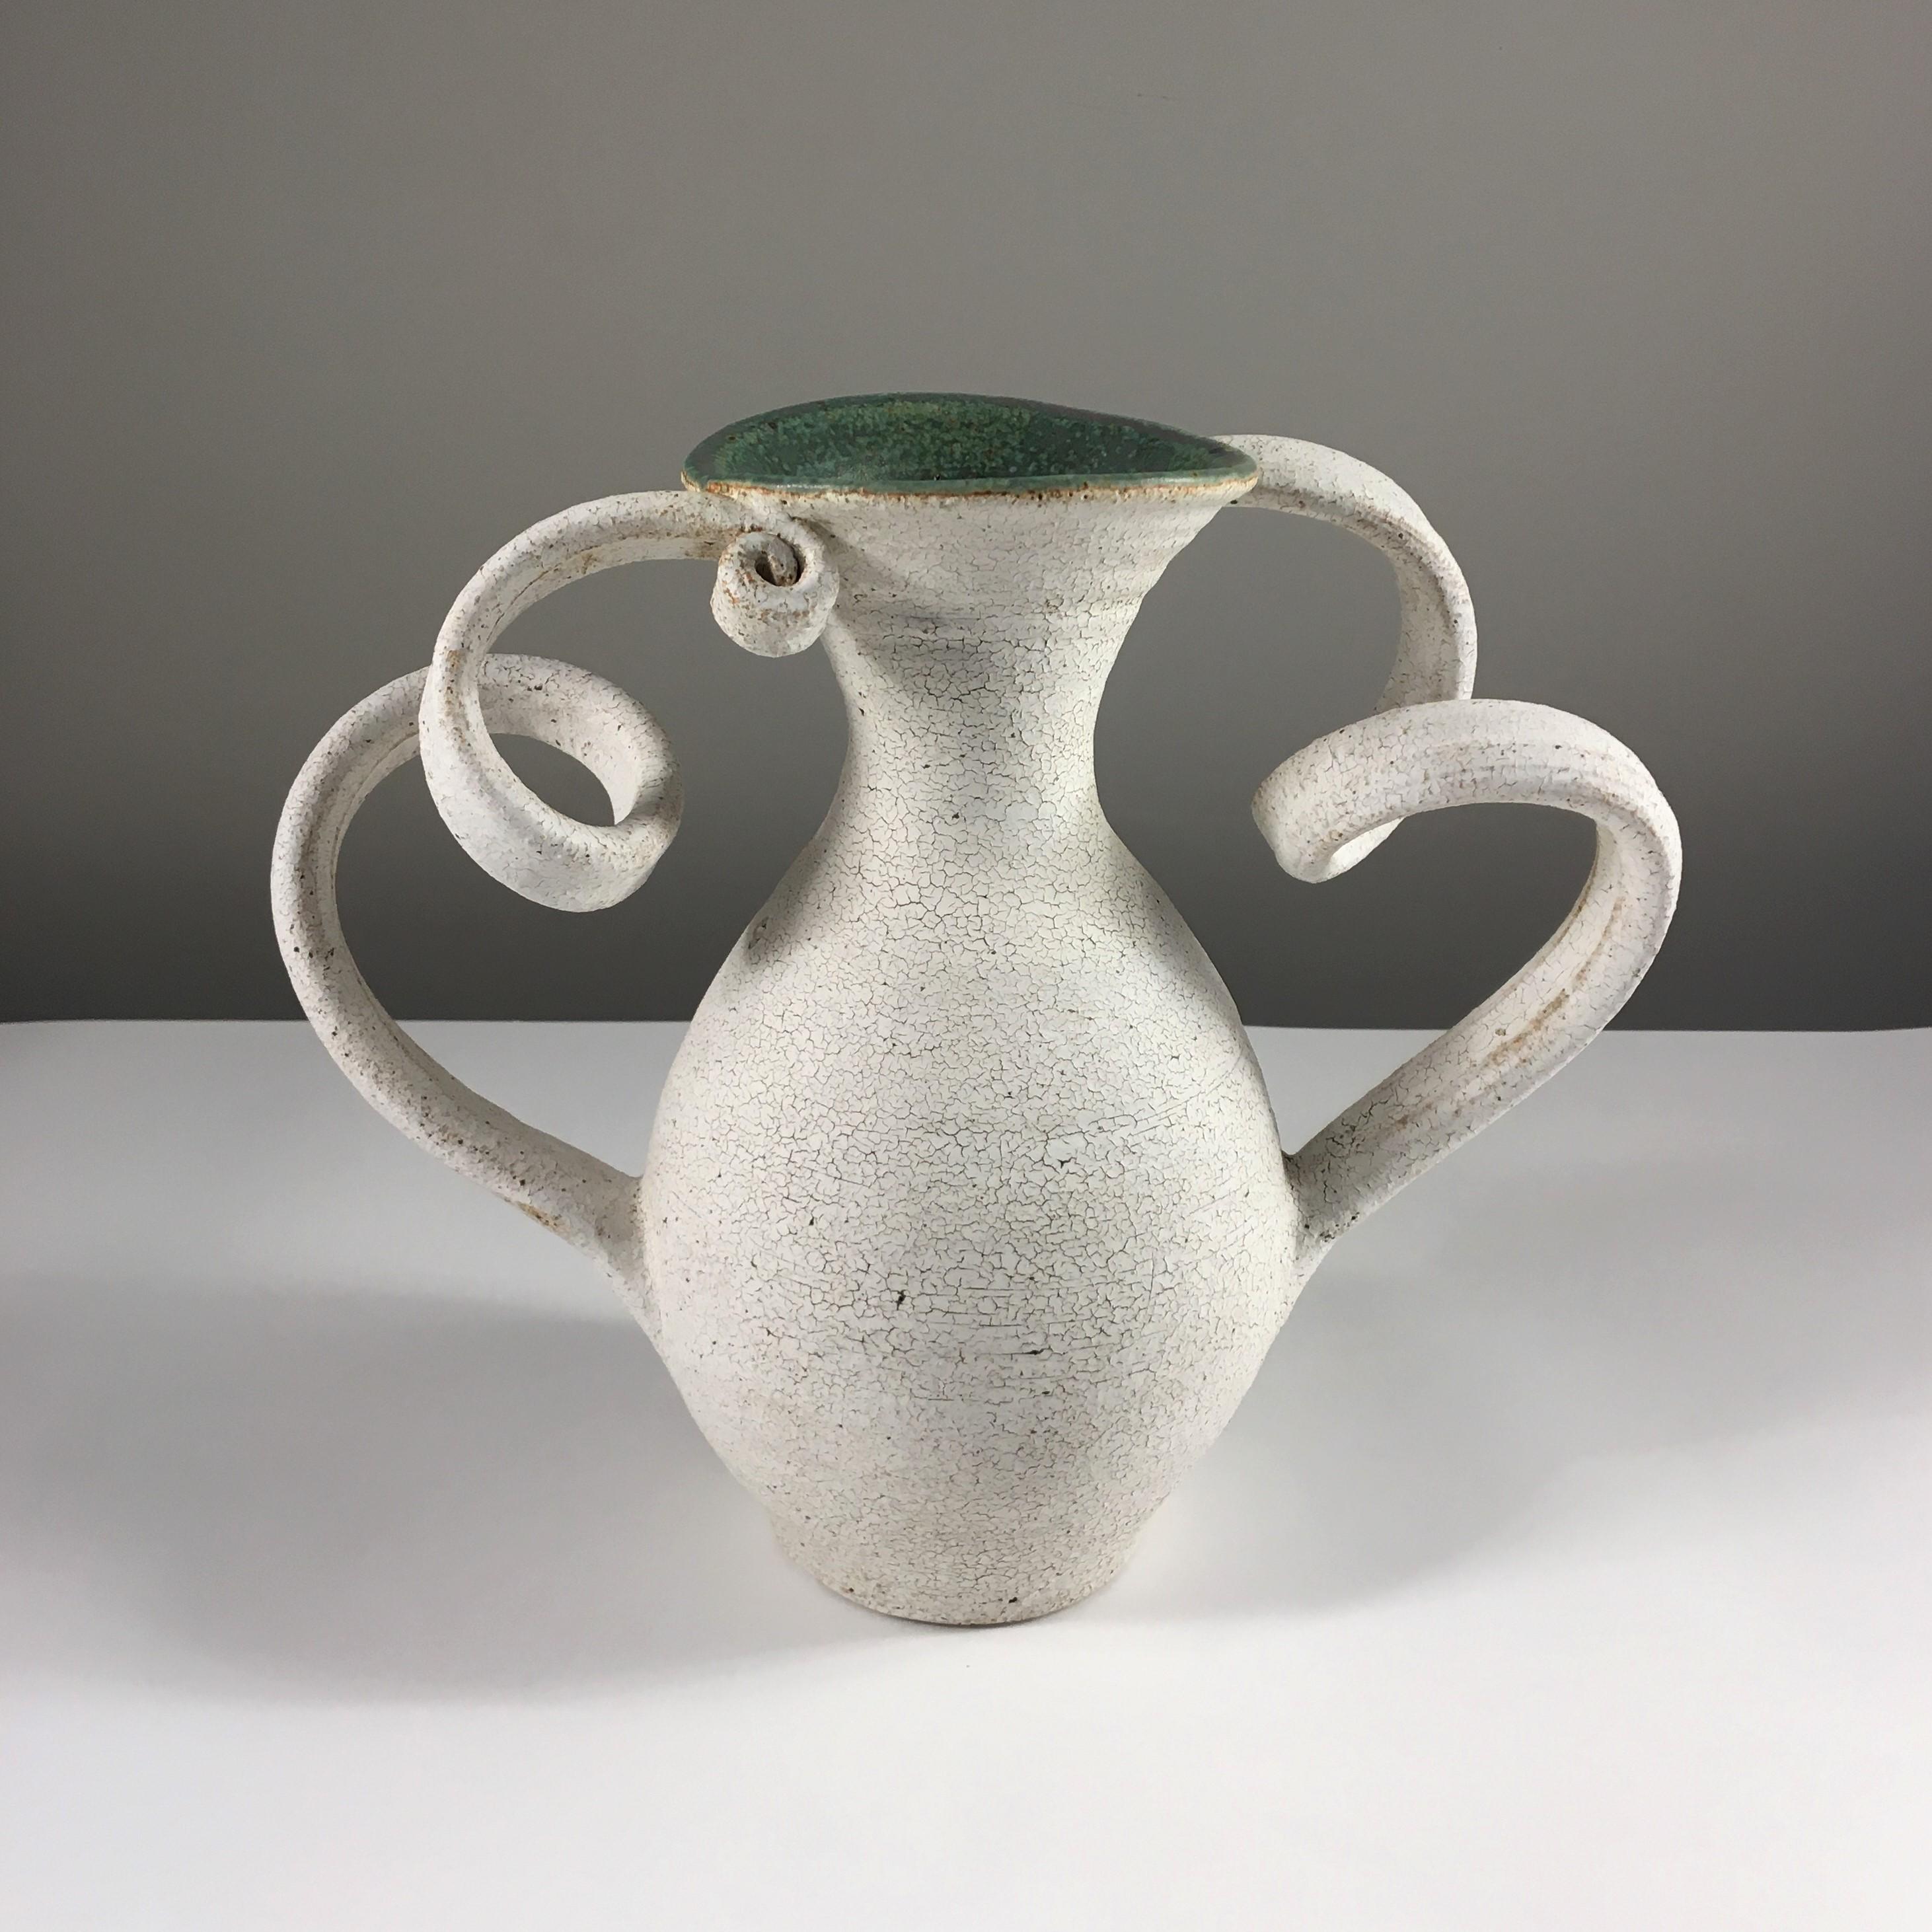 Ceramic Amphora Vase with Wide Opening by Yumiko Kuga. Dimensions: W 11.5